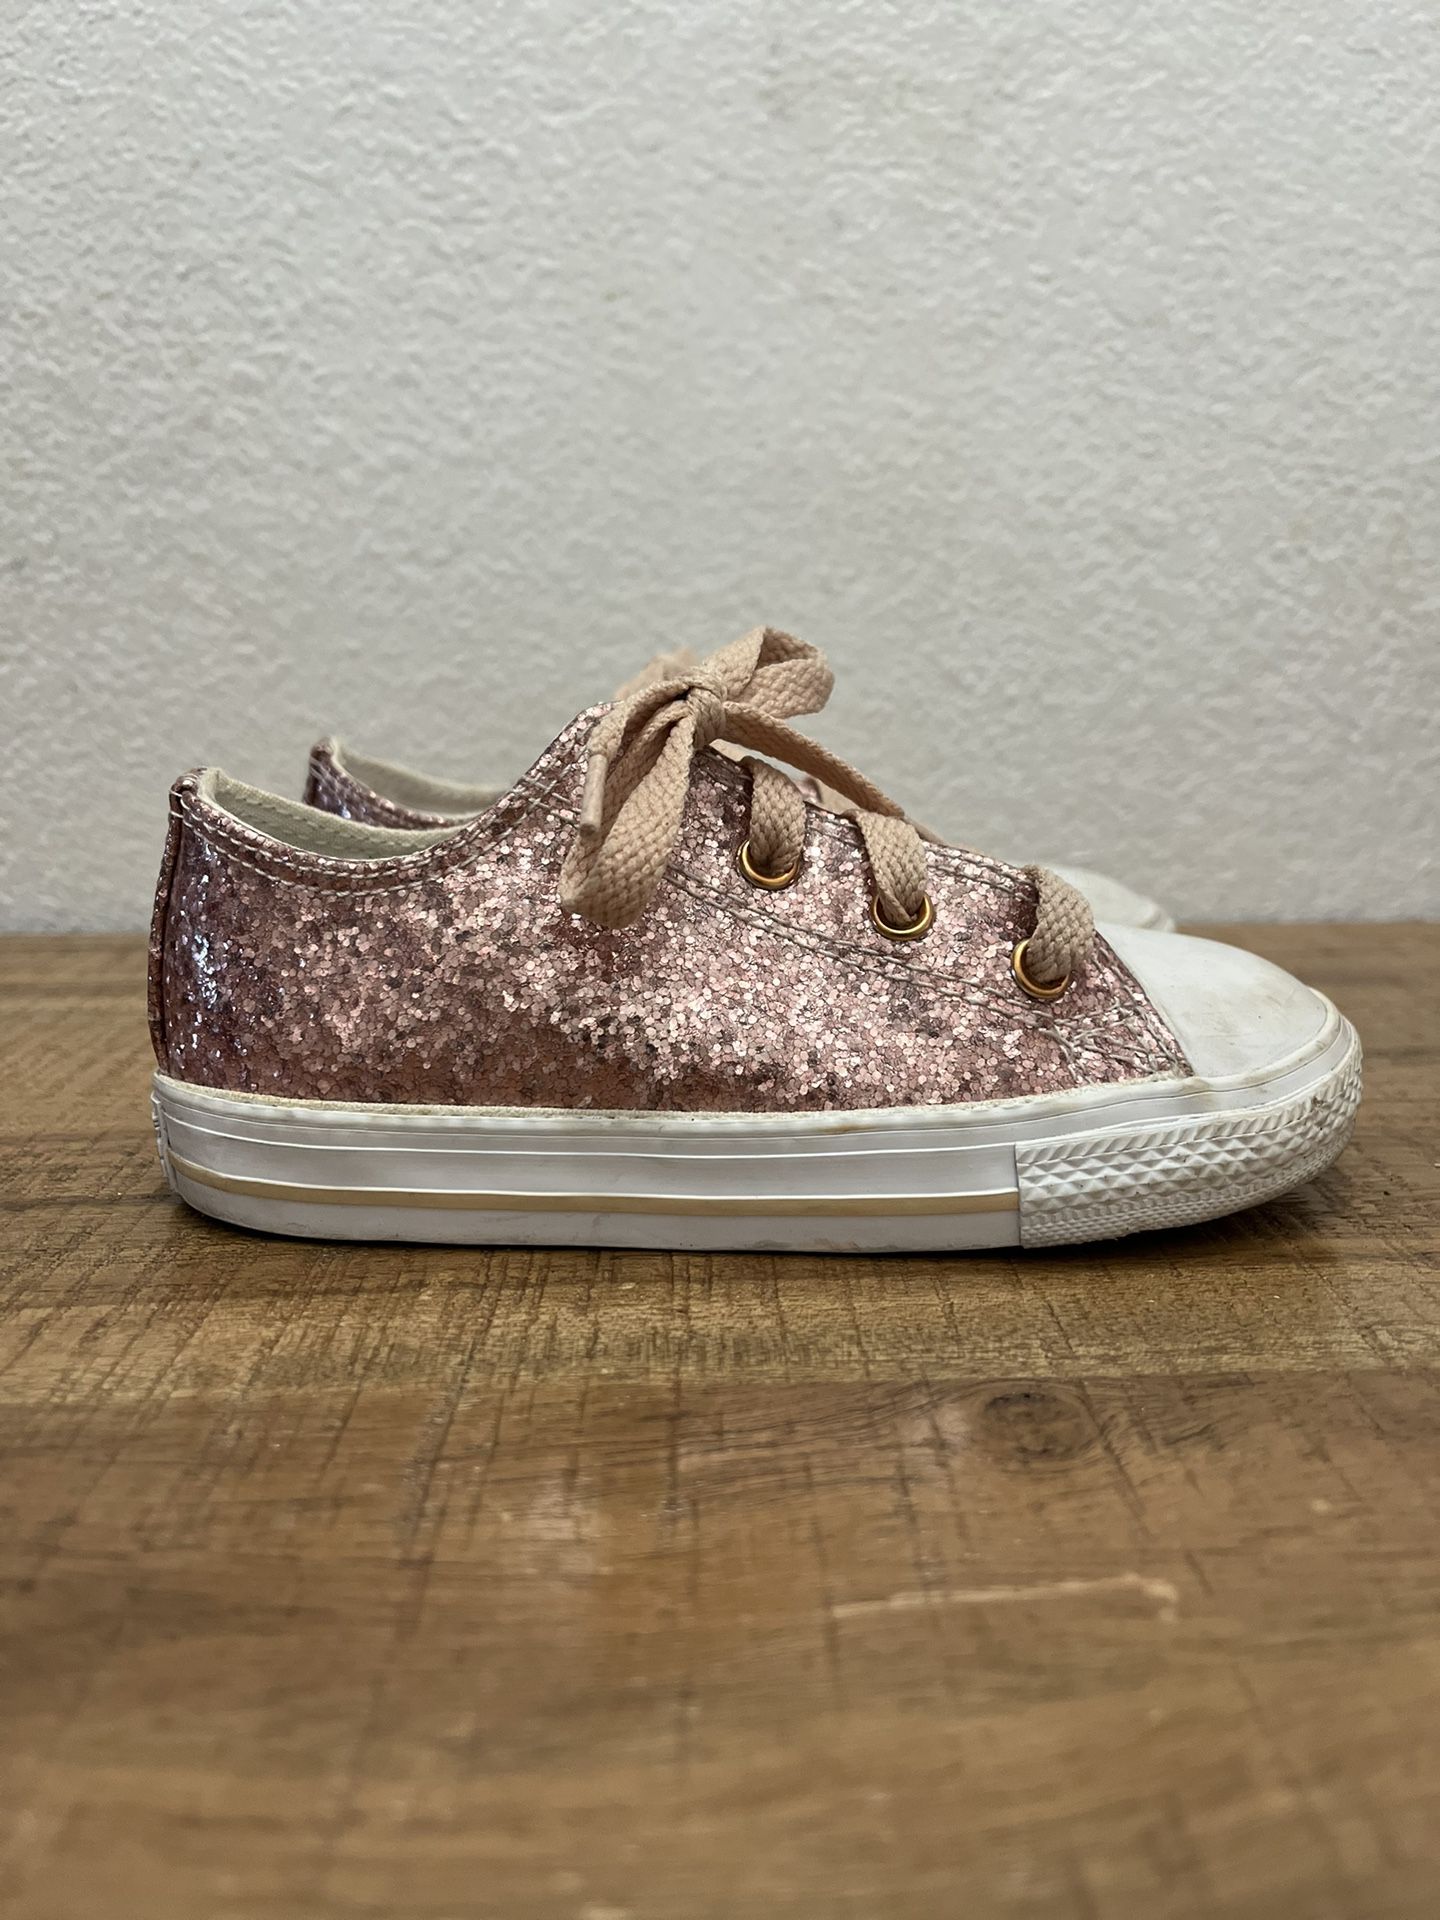 CONVERSE  ALL⭐️STAR girls shoes, size 9